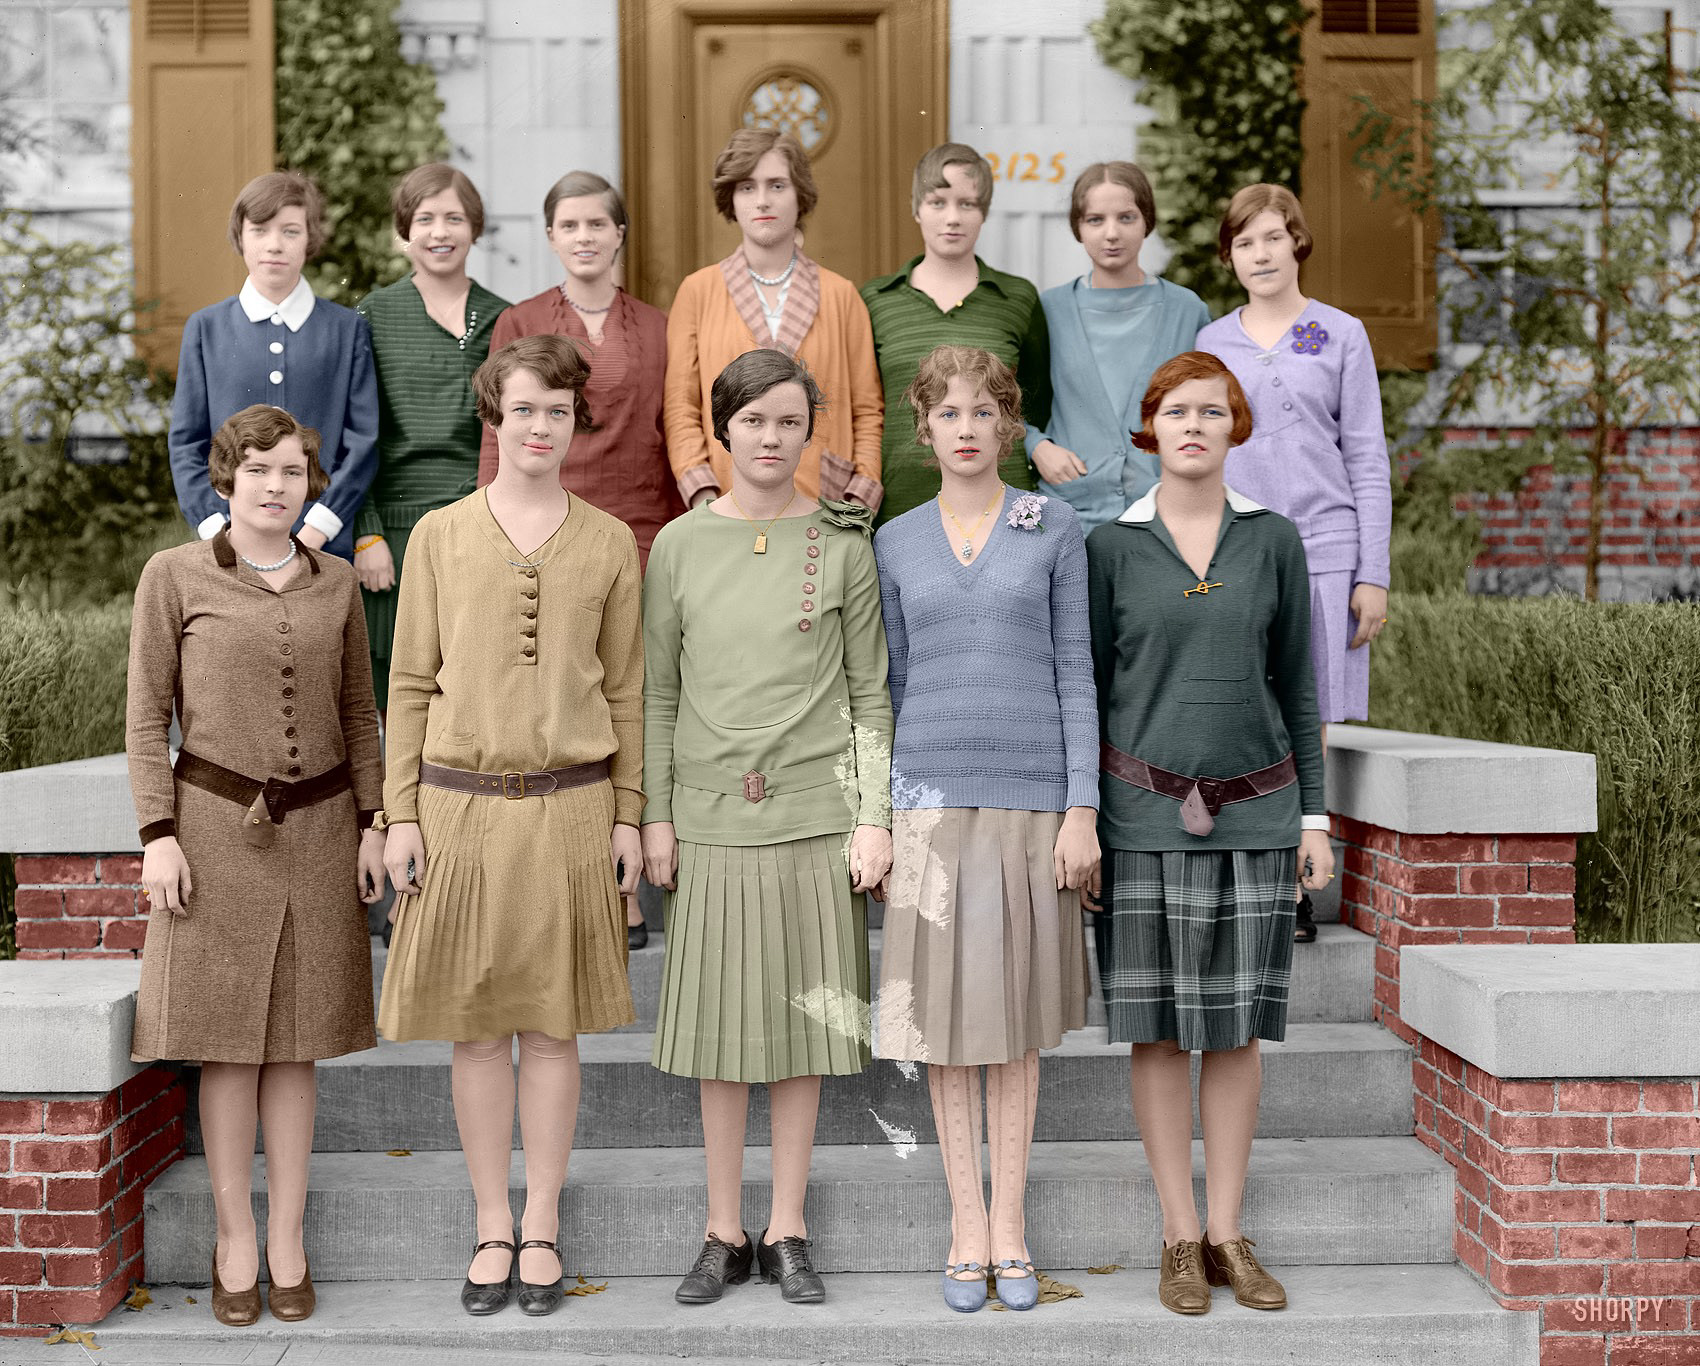 Colorized from Shorpy's files. Holton-Arms School. Harris & Ewing glass negative. View full size.